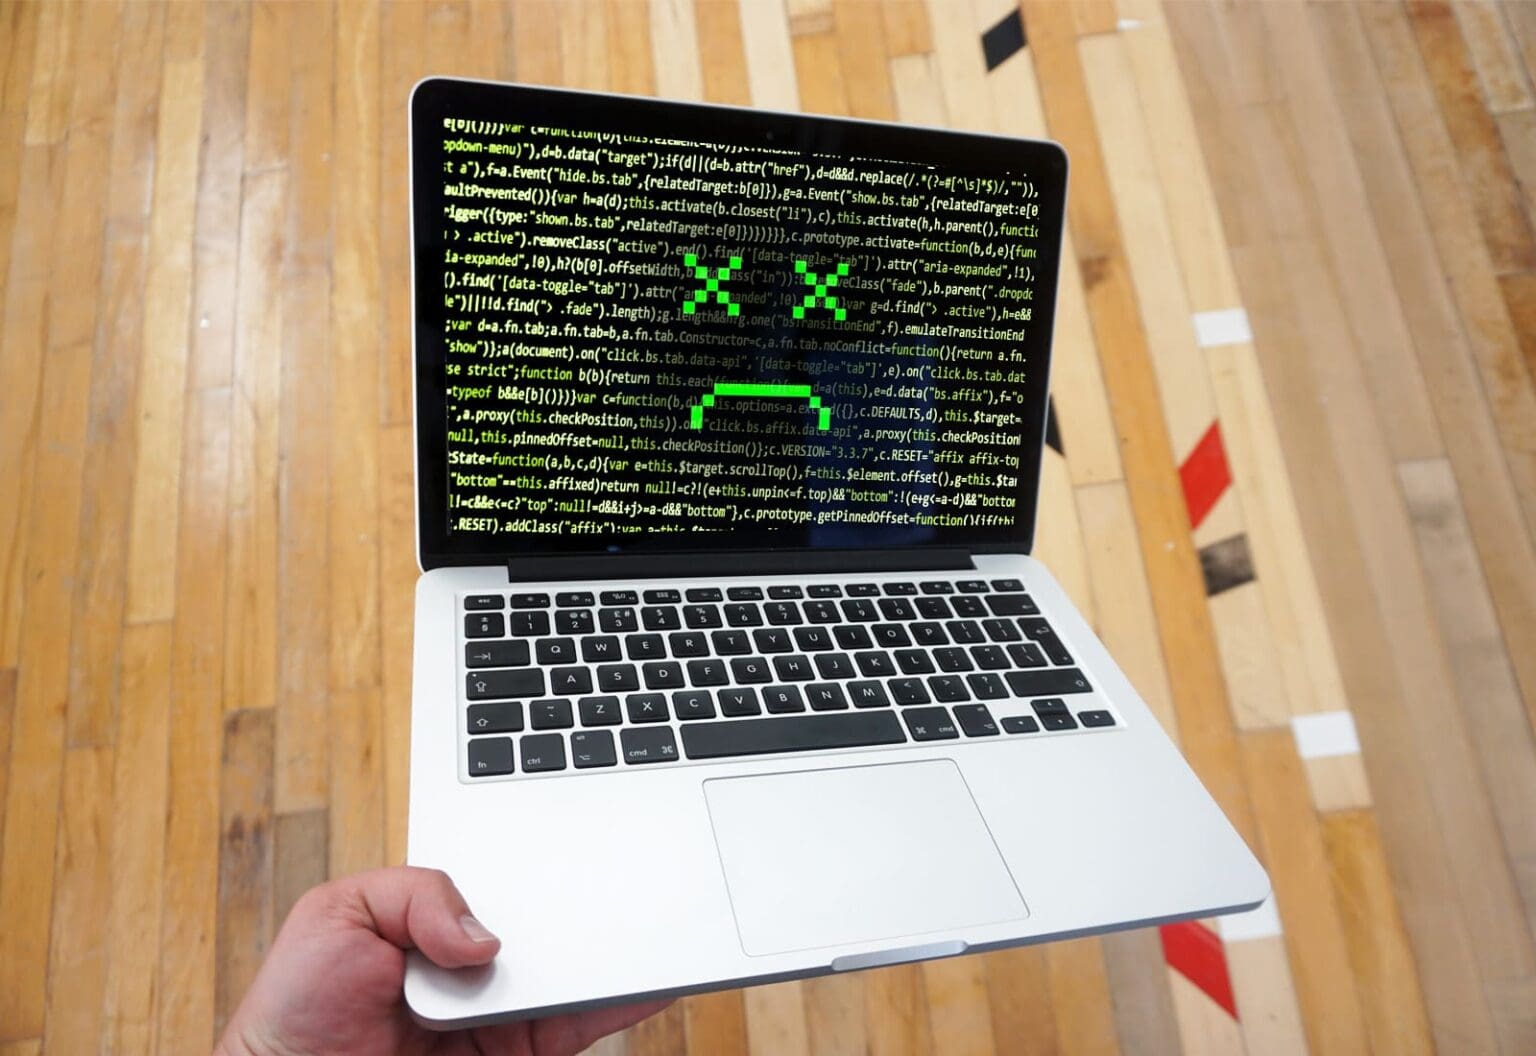 An attacker could take full control of your Mac to steal your personal and financial information.